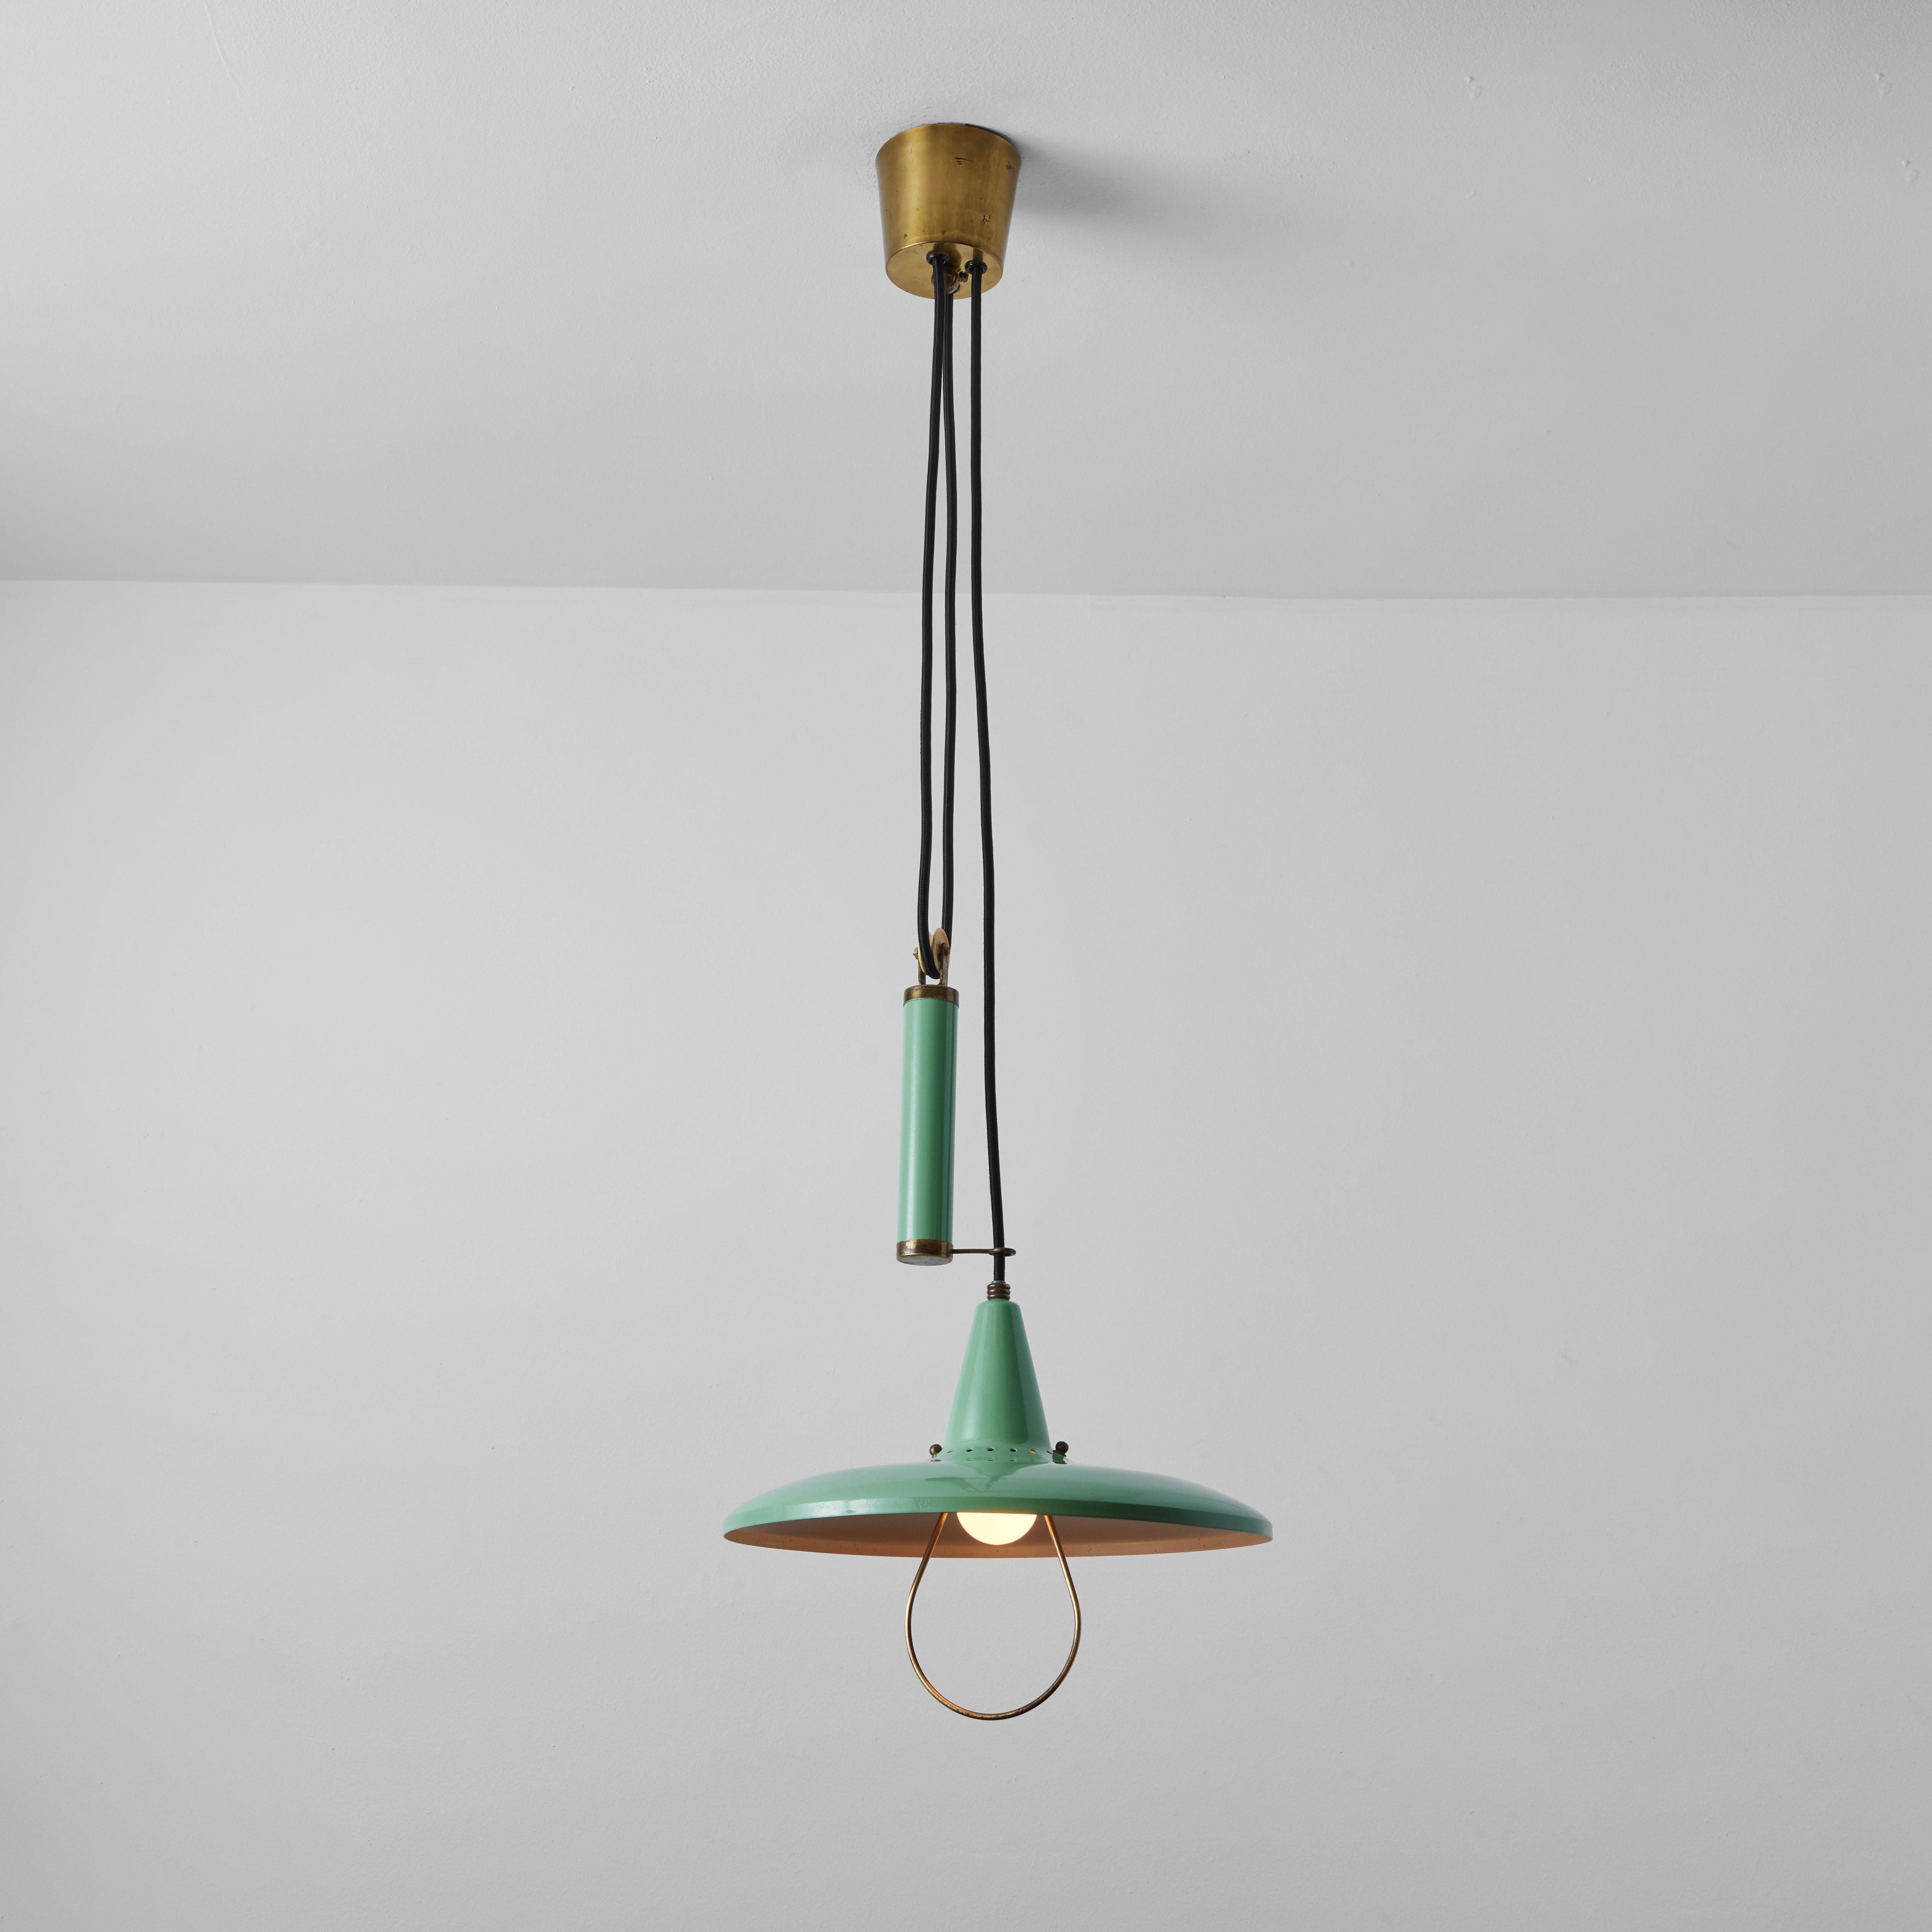 1950s Counter-weight pendant attributed to Gaetano Sciolari for Stilnovo. A quintessentially 1950s Italian design executed in green painted metal and brass. Height can be adjusted by raising or lowering the counter weight. A highly functional and